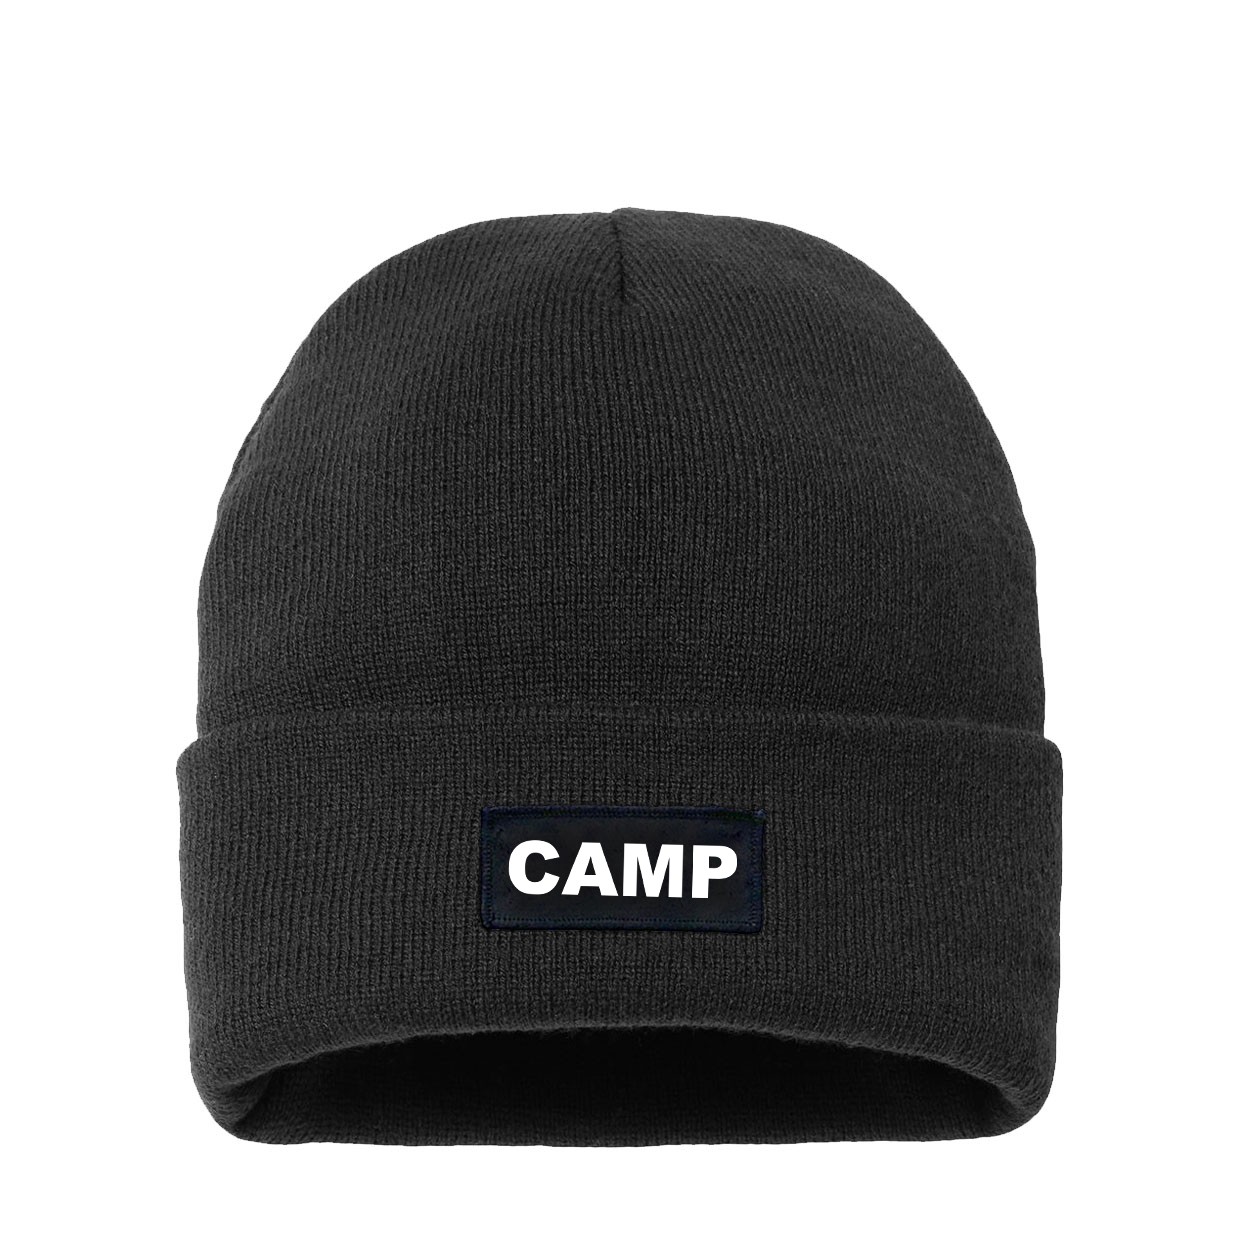 Camp Brand Logo Night Out Woven Patch Sherpa Lined Cuffed Beanie Black (White Logo)